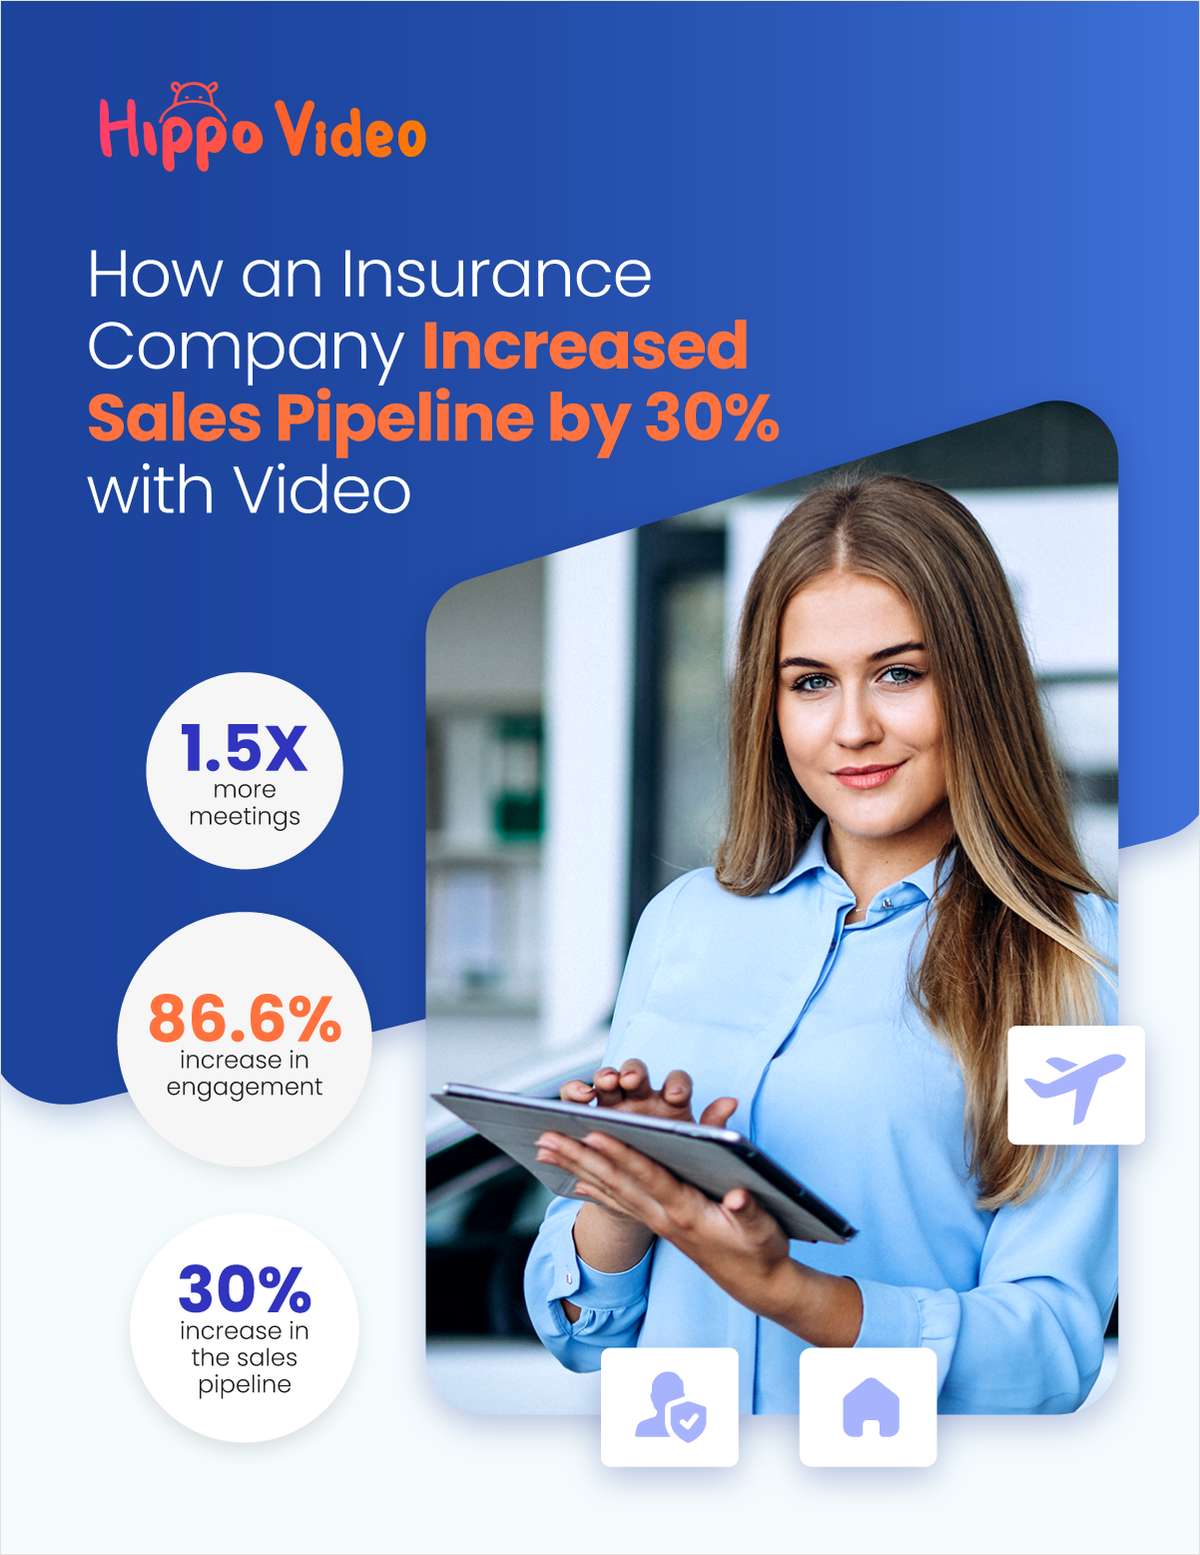 How a leading Insurance Company Increased Sales Pipeline by 30% using videos